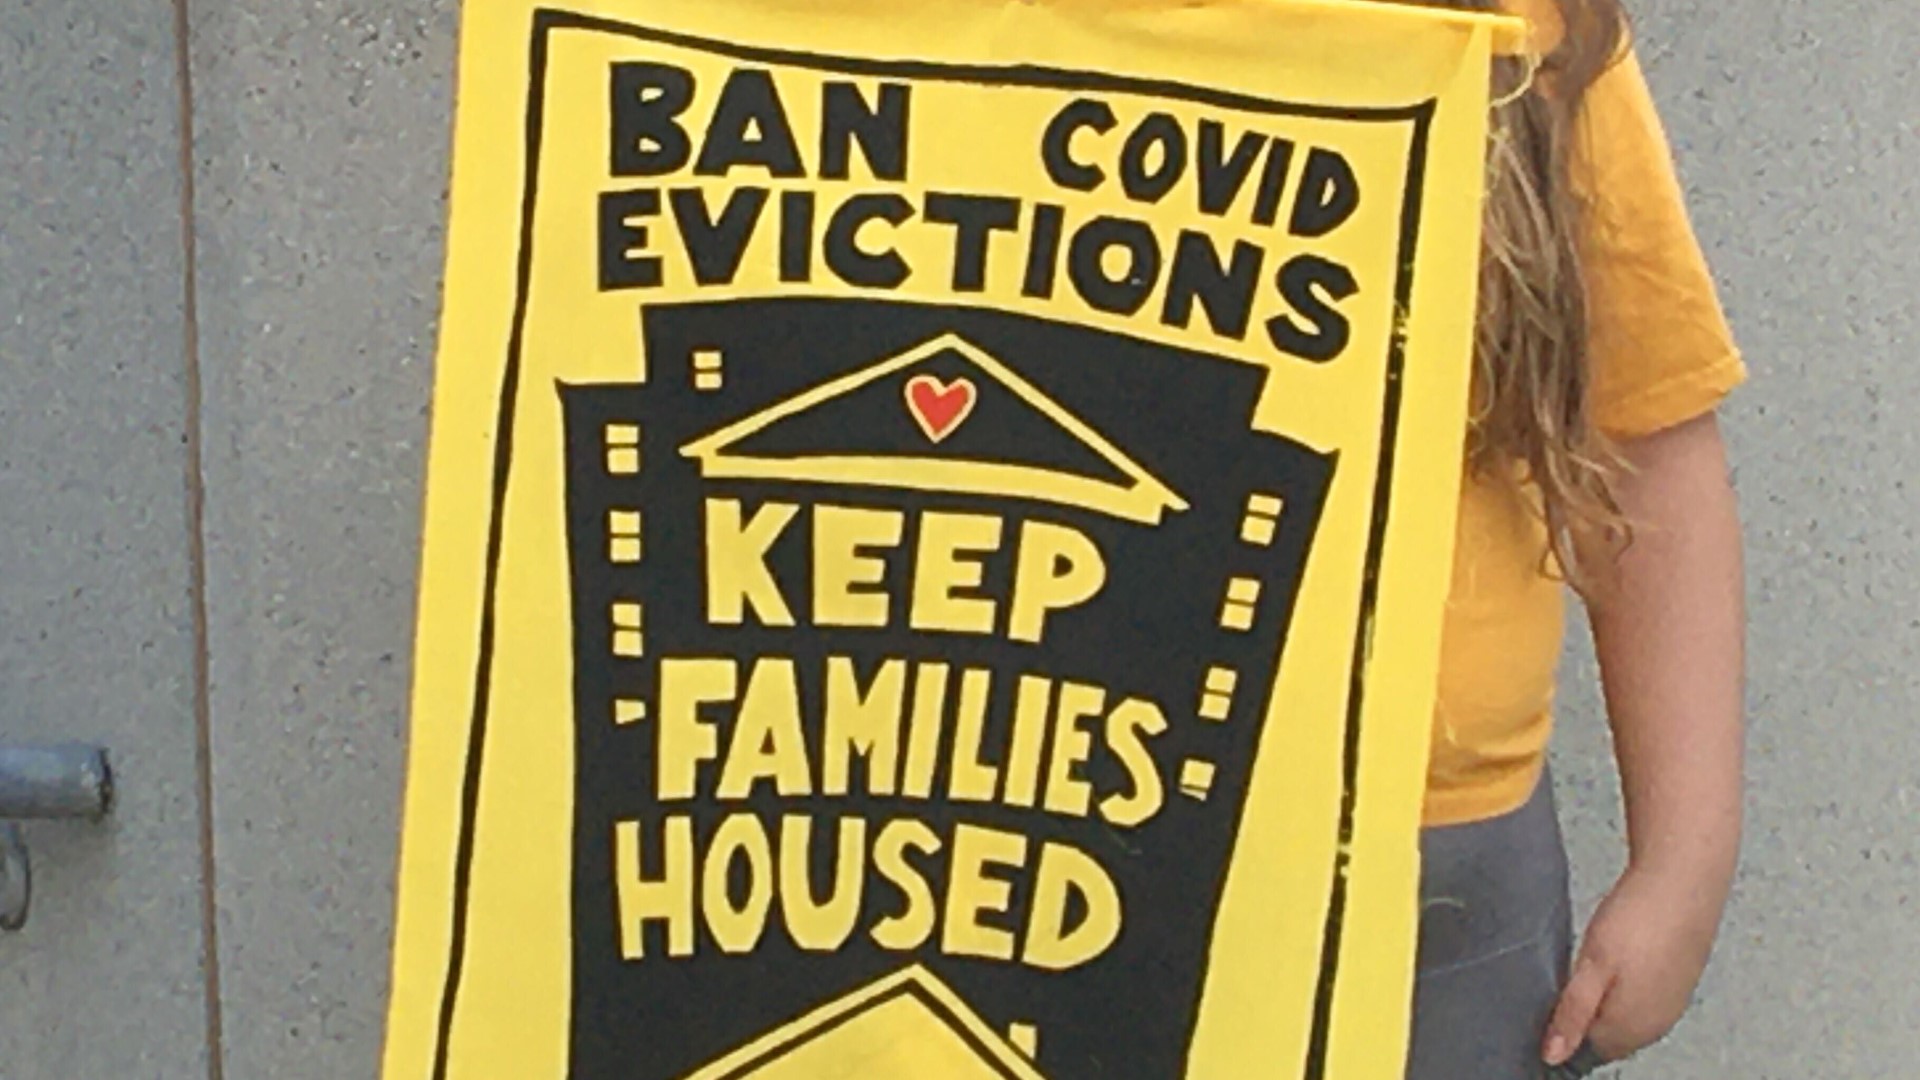 Protesters and organizers say the new eviction protections, just past late Monday night, don't do enough to protect renters.